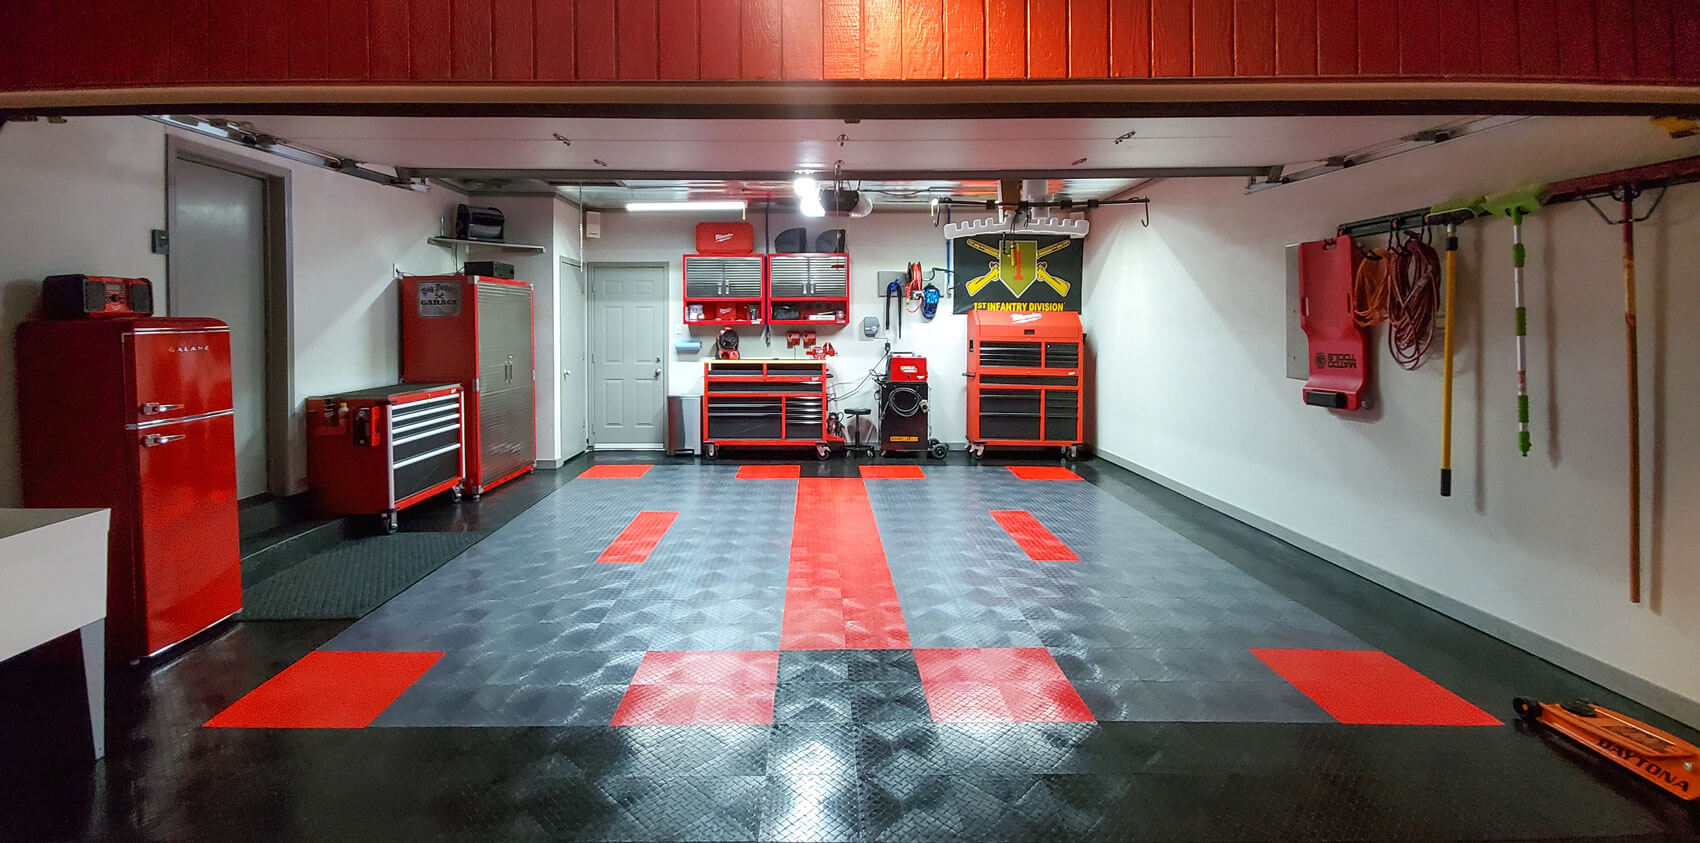 The storage solutions in this garage take it to the next level